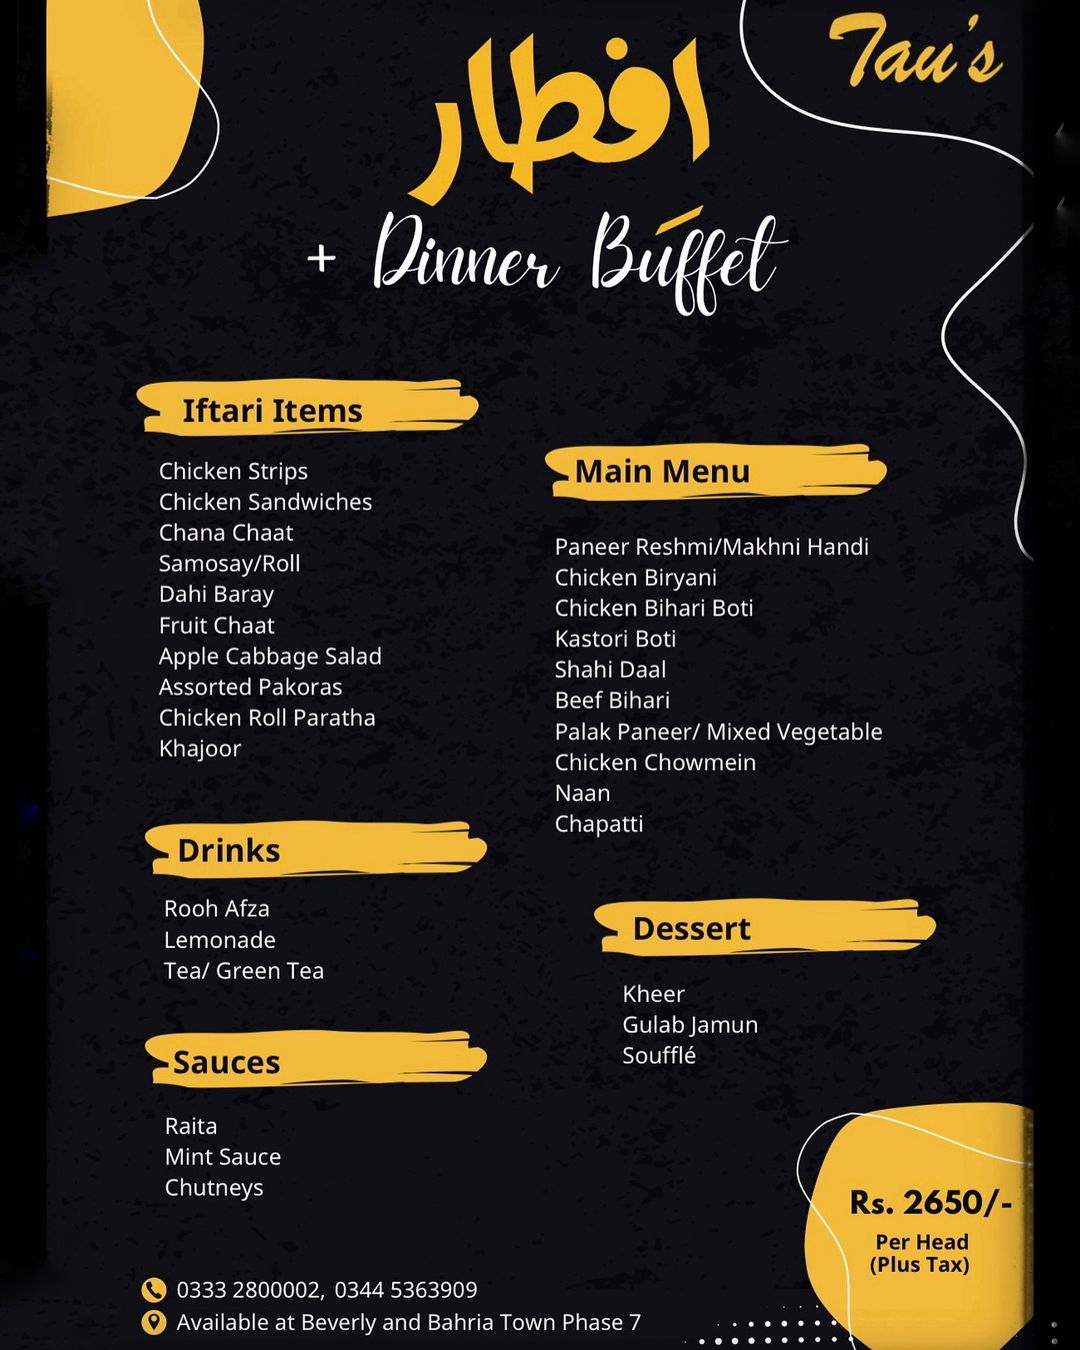 sehri and iftar buffet in Islamabad : taus